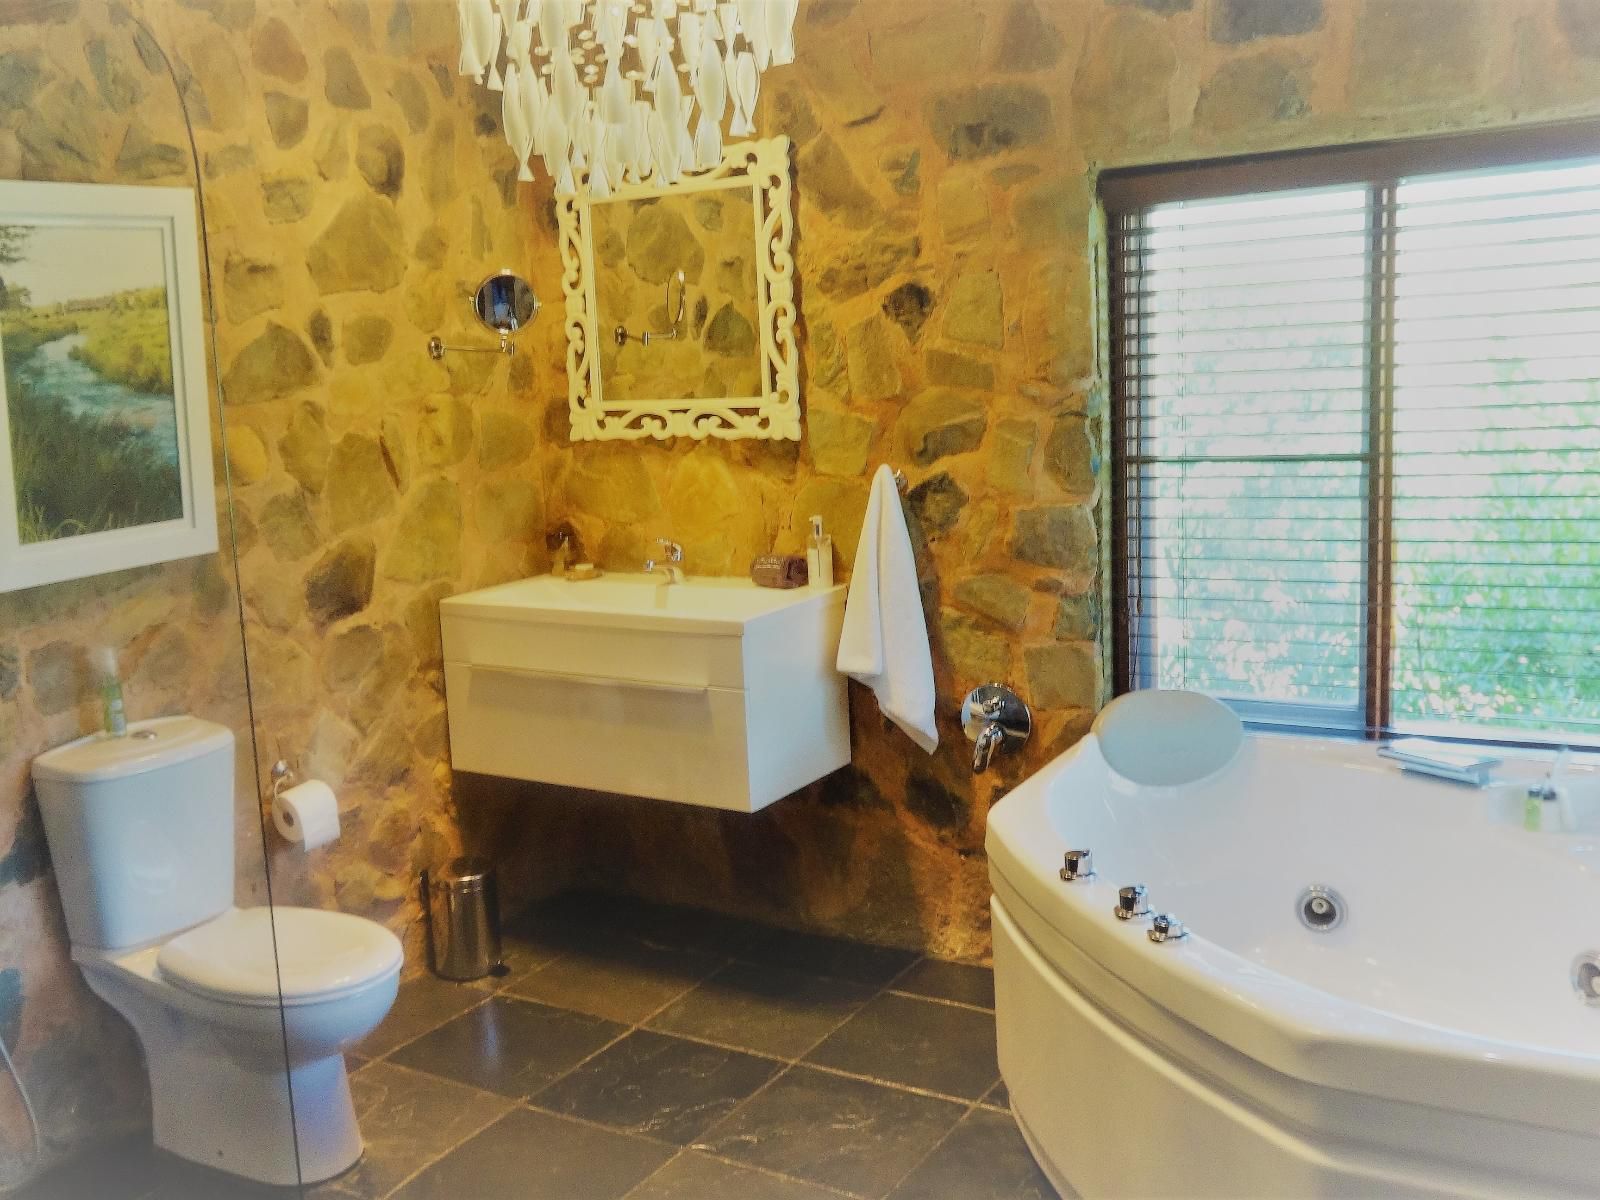 Willow Weir Cottage Dullstroom Mpumalanga South Africa Bathroom